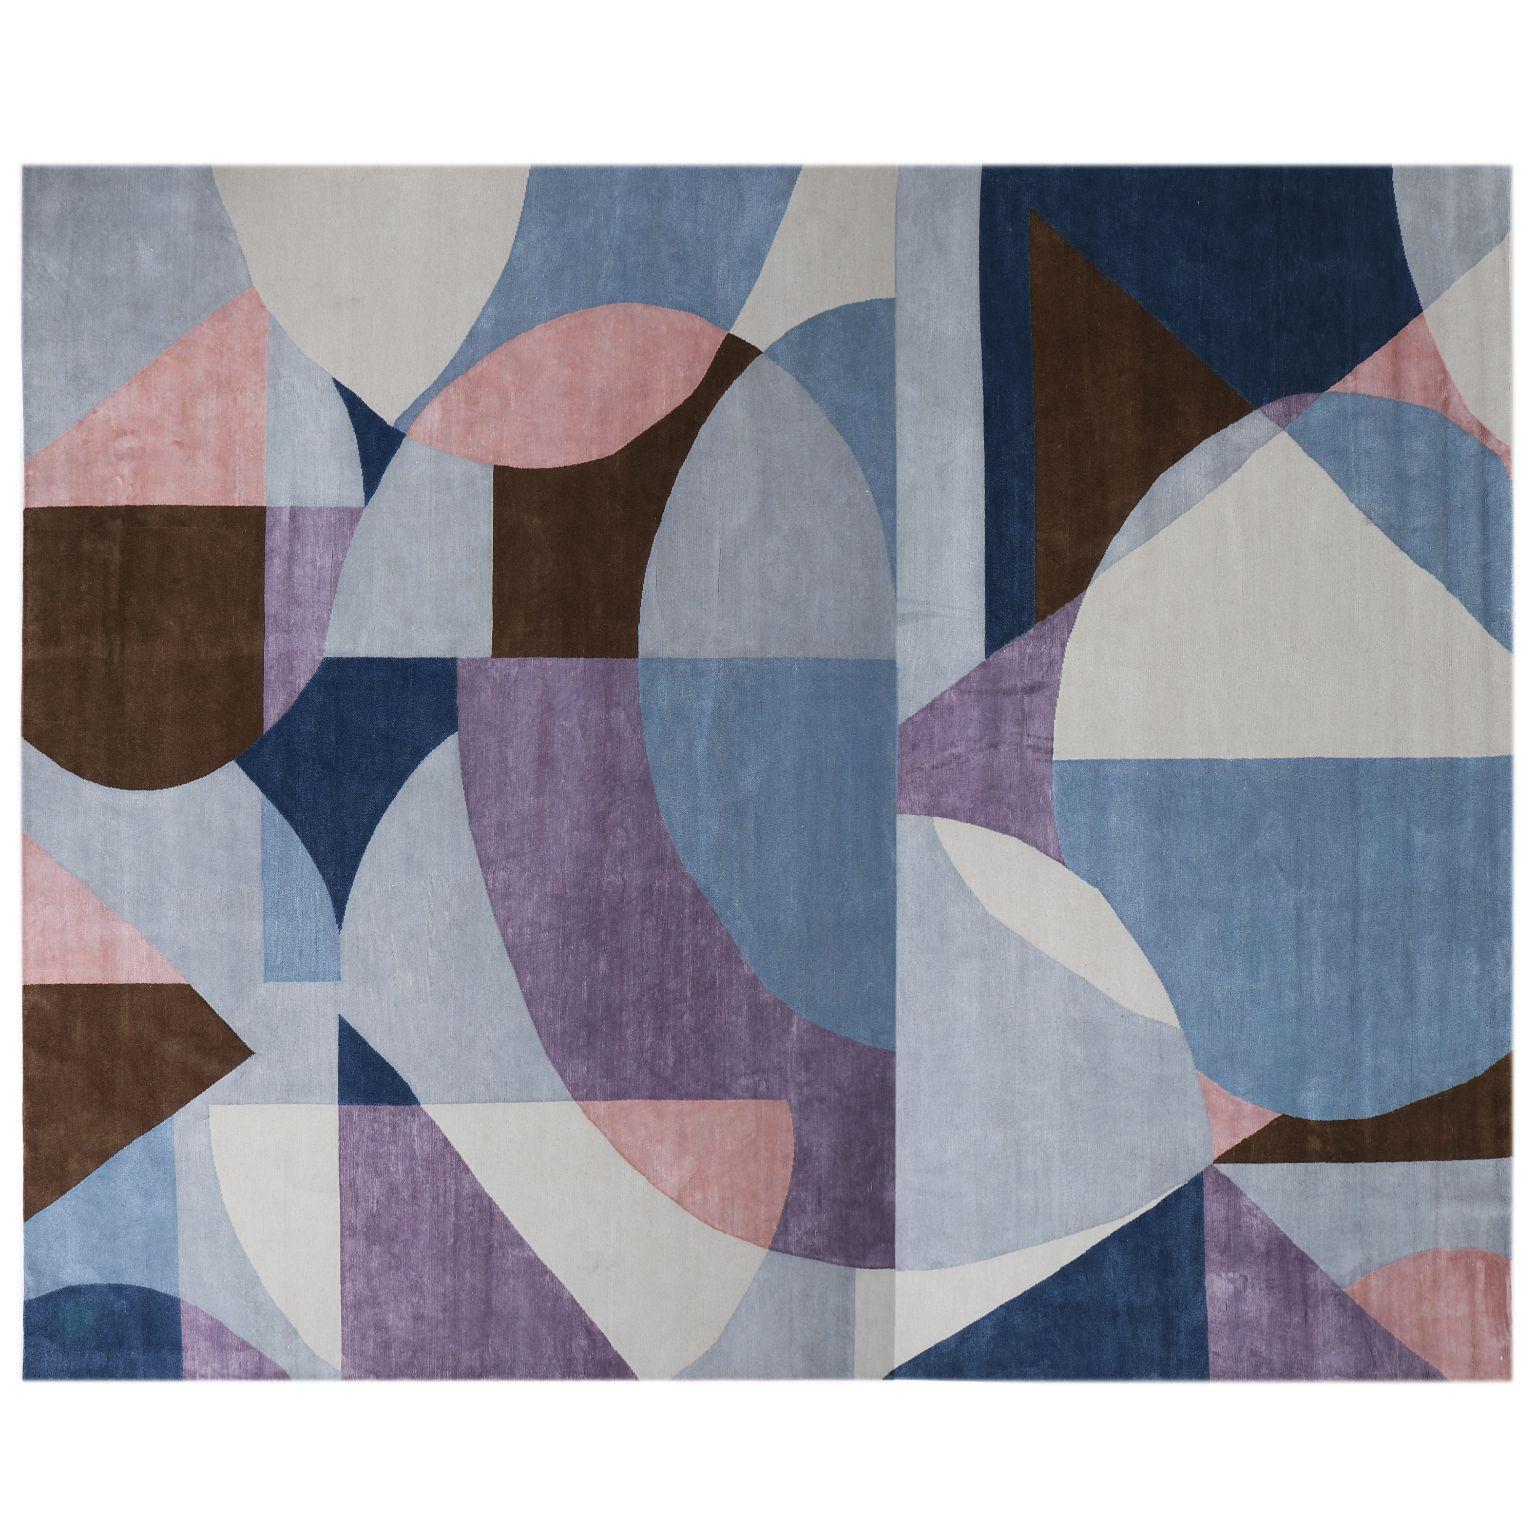 Pastel shapes large rug by Art & Loom
Dimensions: D304.8 x H426.7 cm
Materials: New Zealand wool & Chinese silk
Quality (Knots per Inch): 100
Also available in different dimensions.

Samantha Gallacher has always had a keen eye for aesthetics,